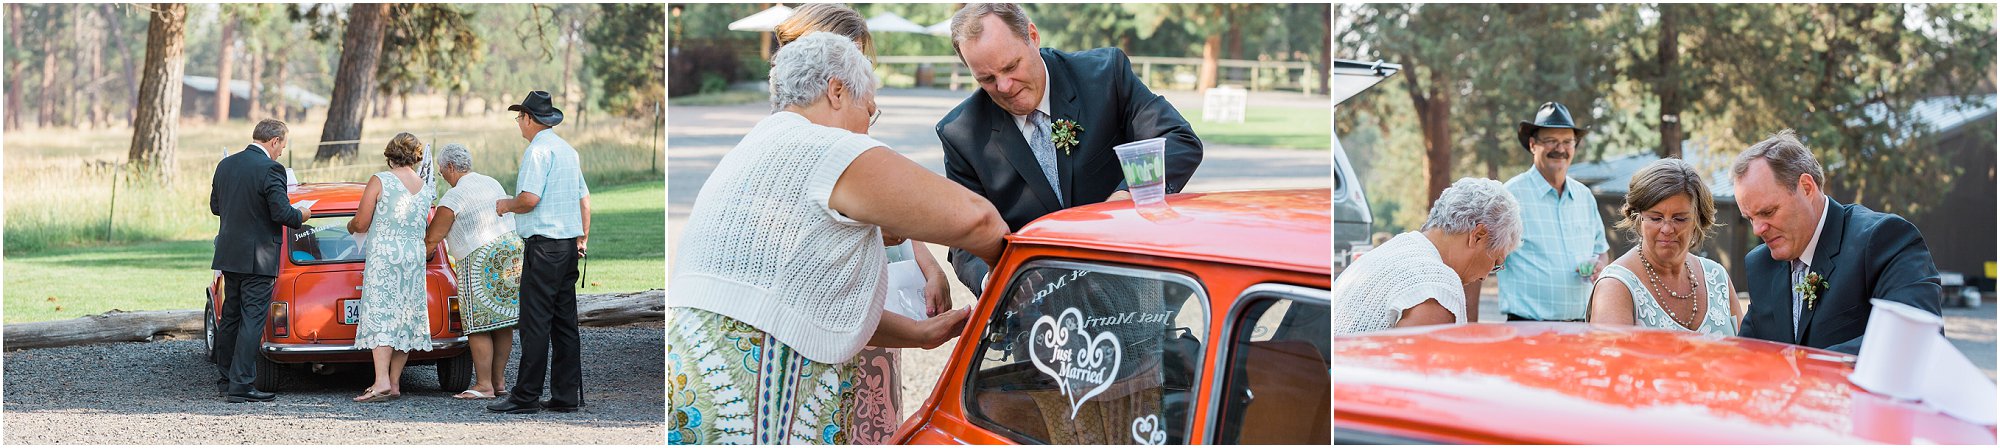 Wedding guests decorate the couple's getaway car at the rustic Rock Springs Ranch wedding venue in Tumalo, OR. | Erica Swantek Photography